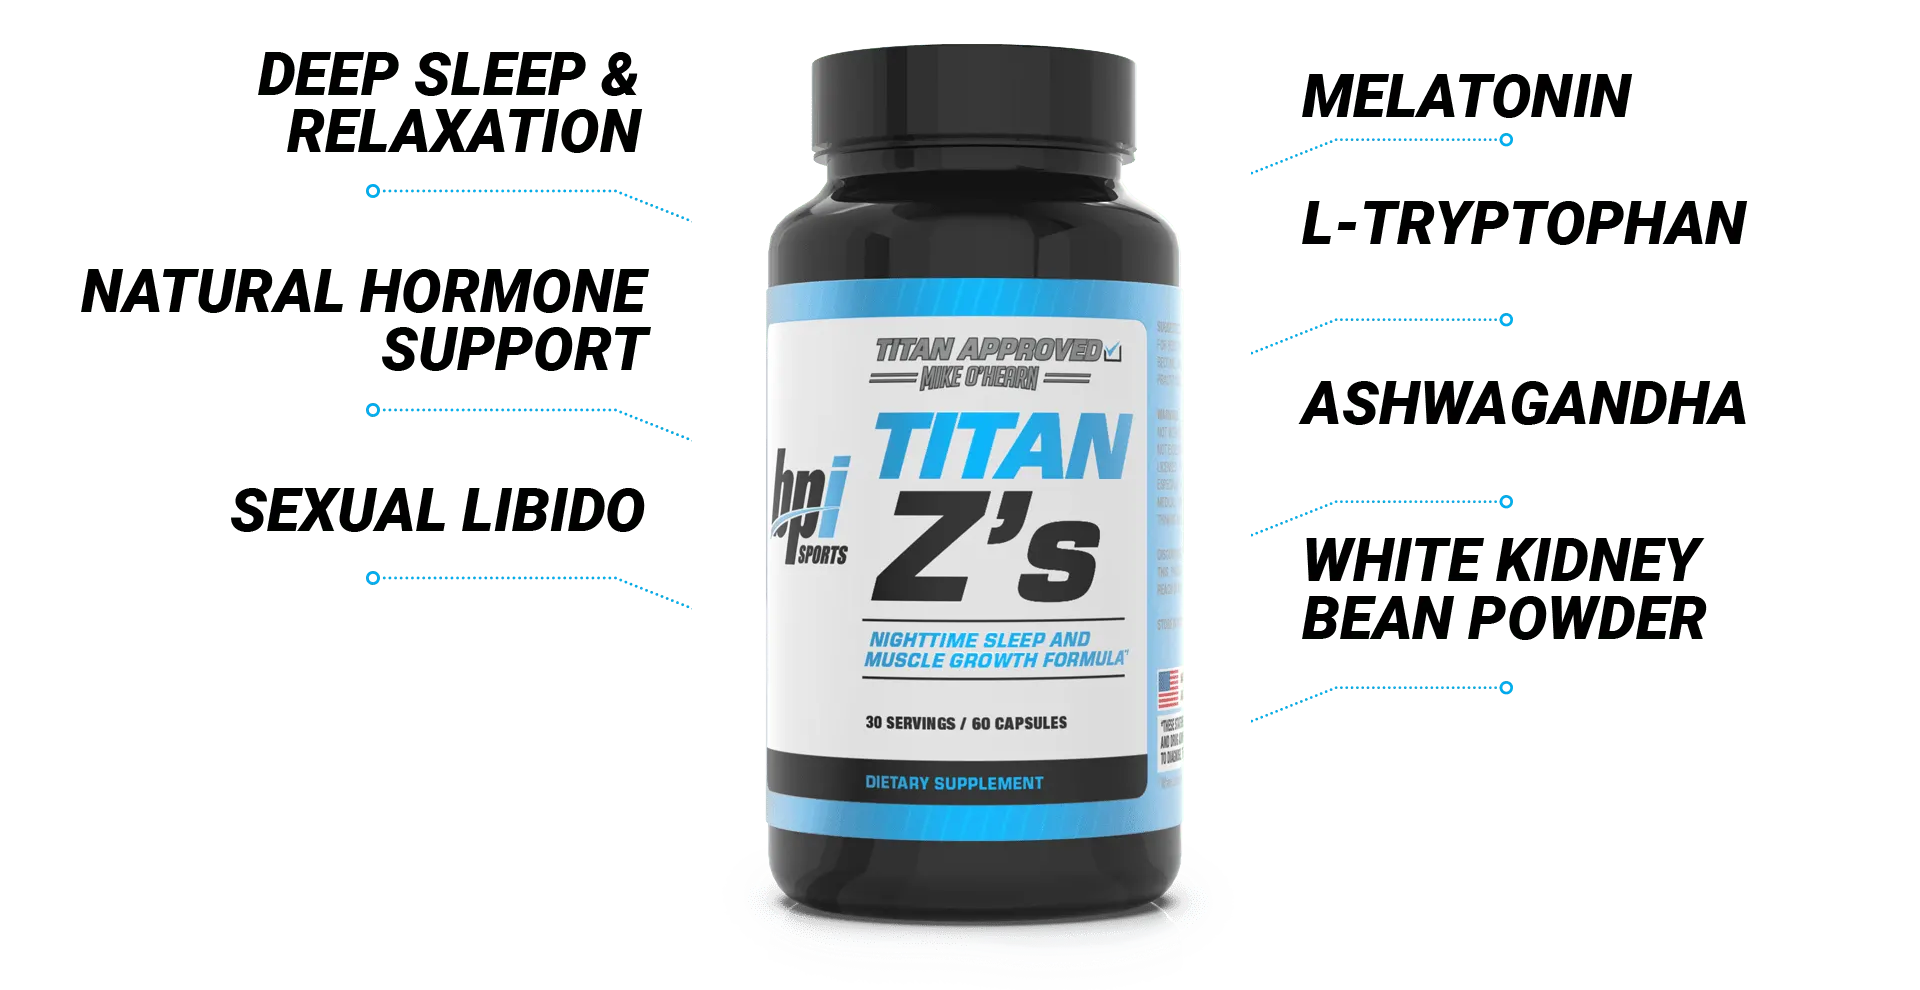 Capsule bottle of Titan Z's with benefits